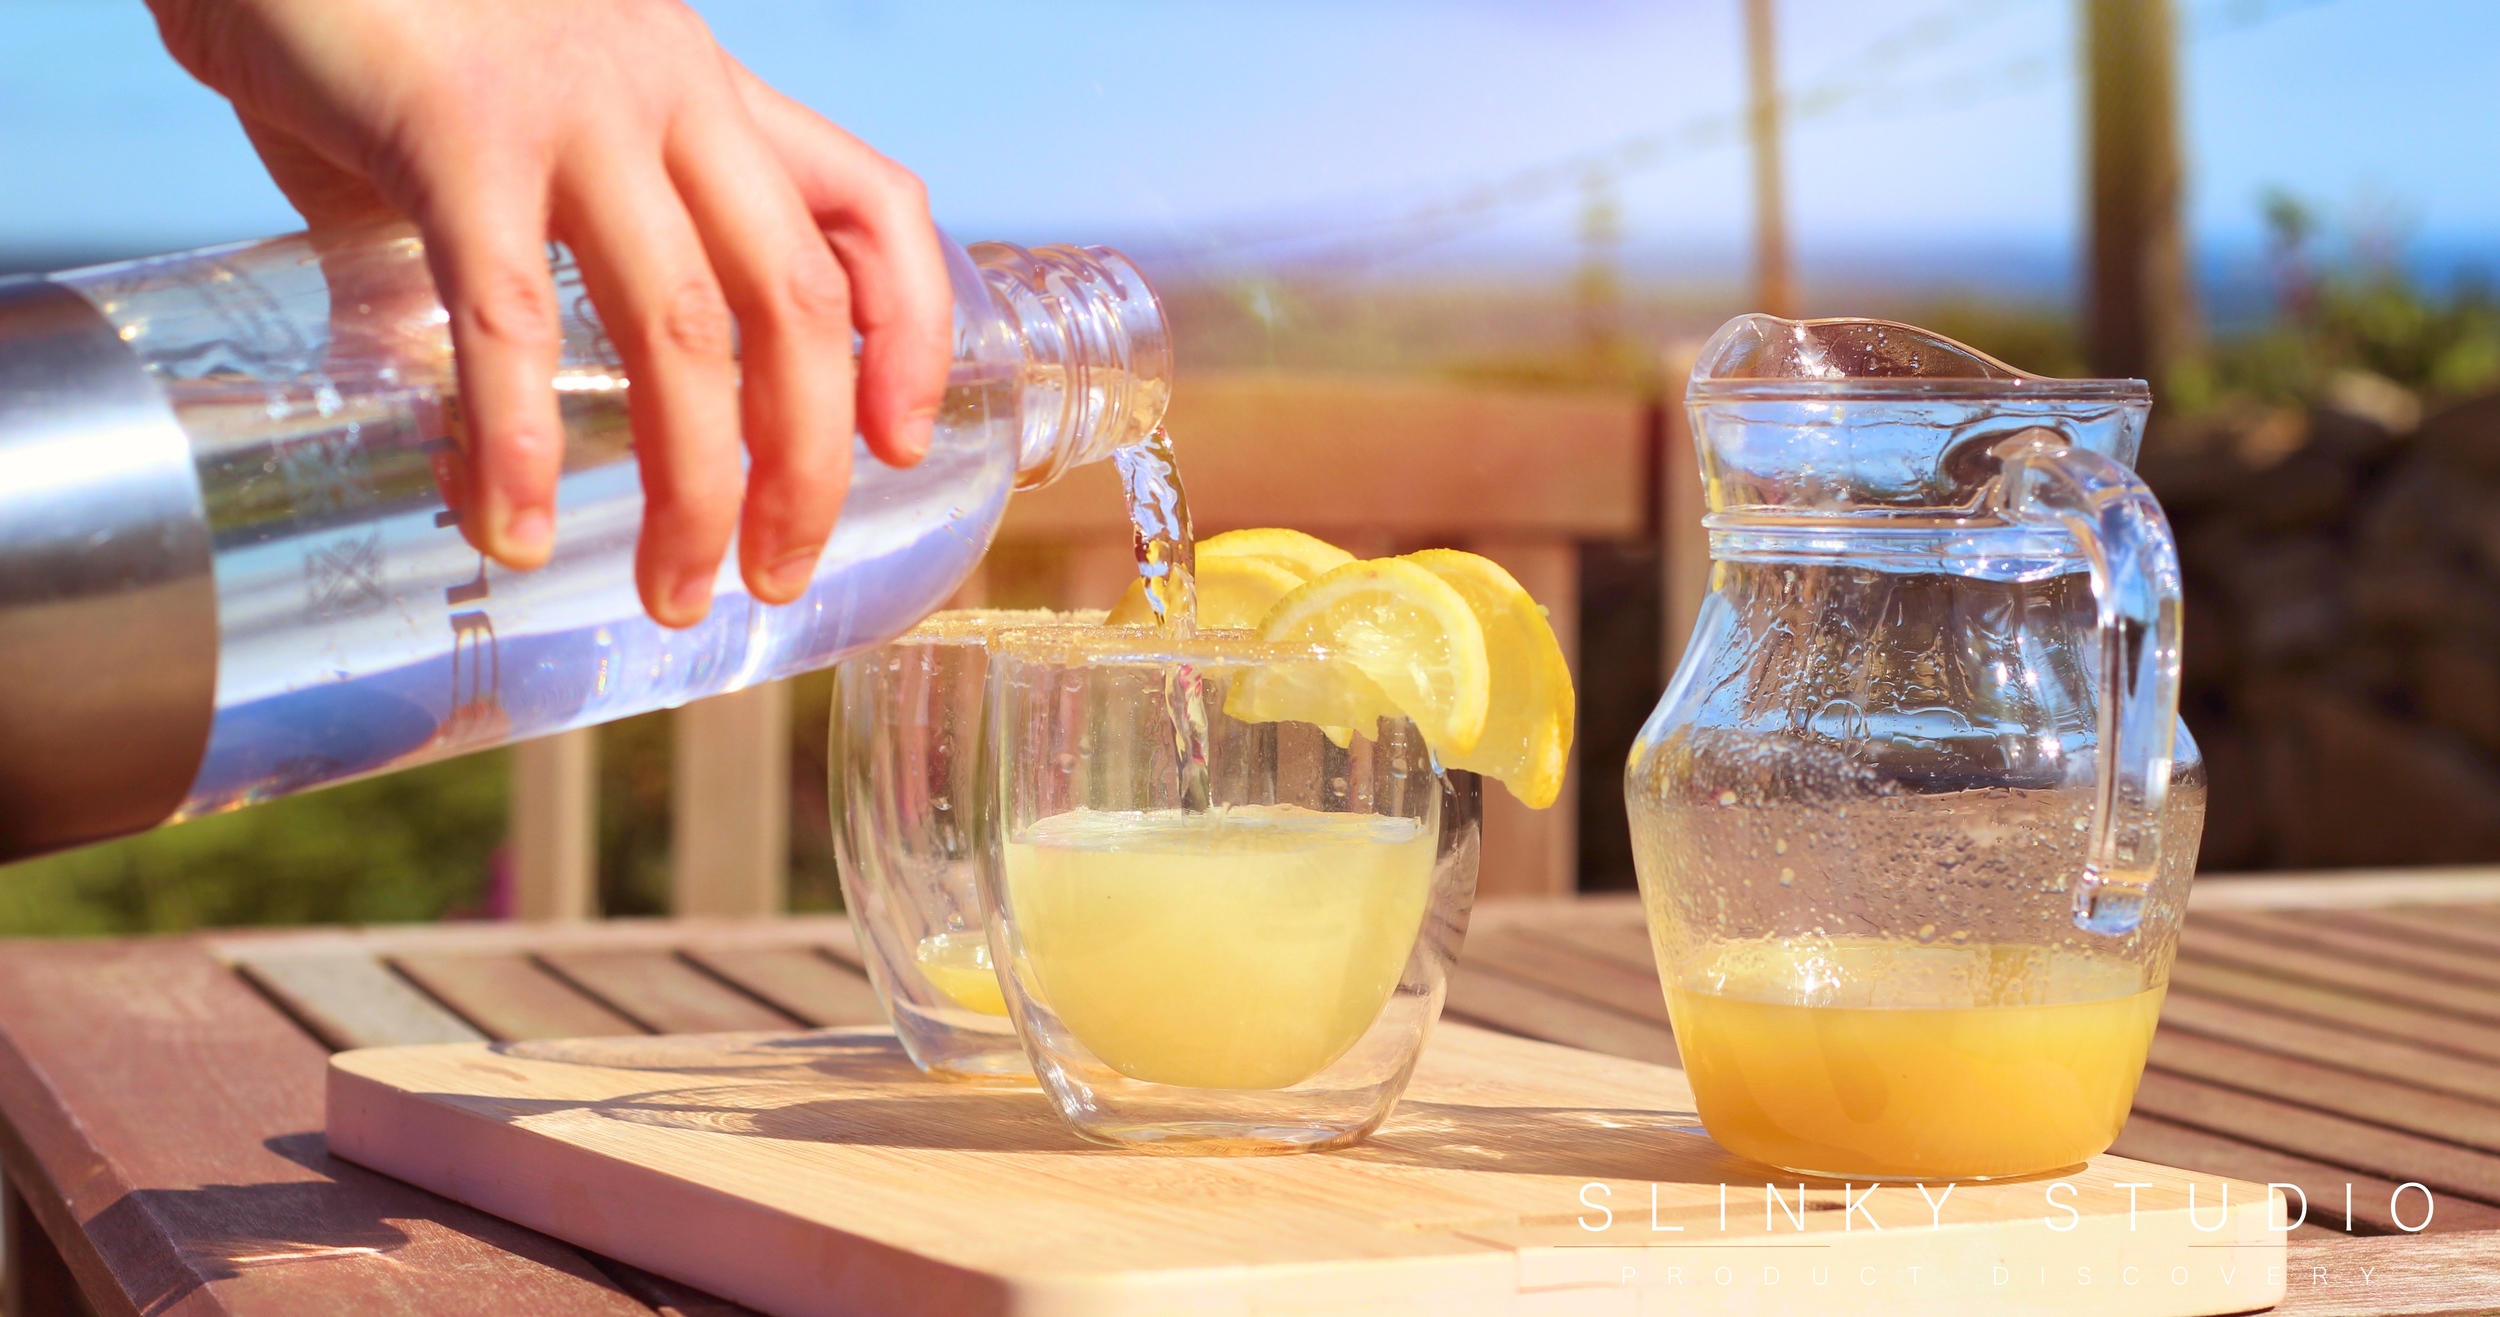 Optimum ThermoCook Ginger Beer SodaStream Being Poured On Bench in Sun.jpg